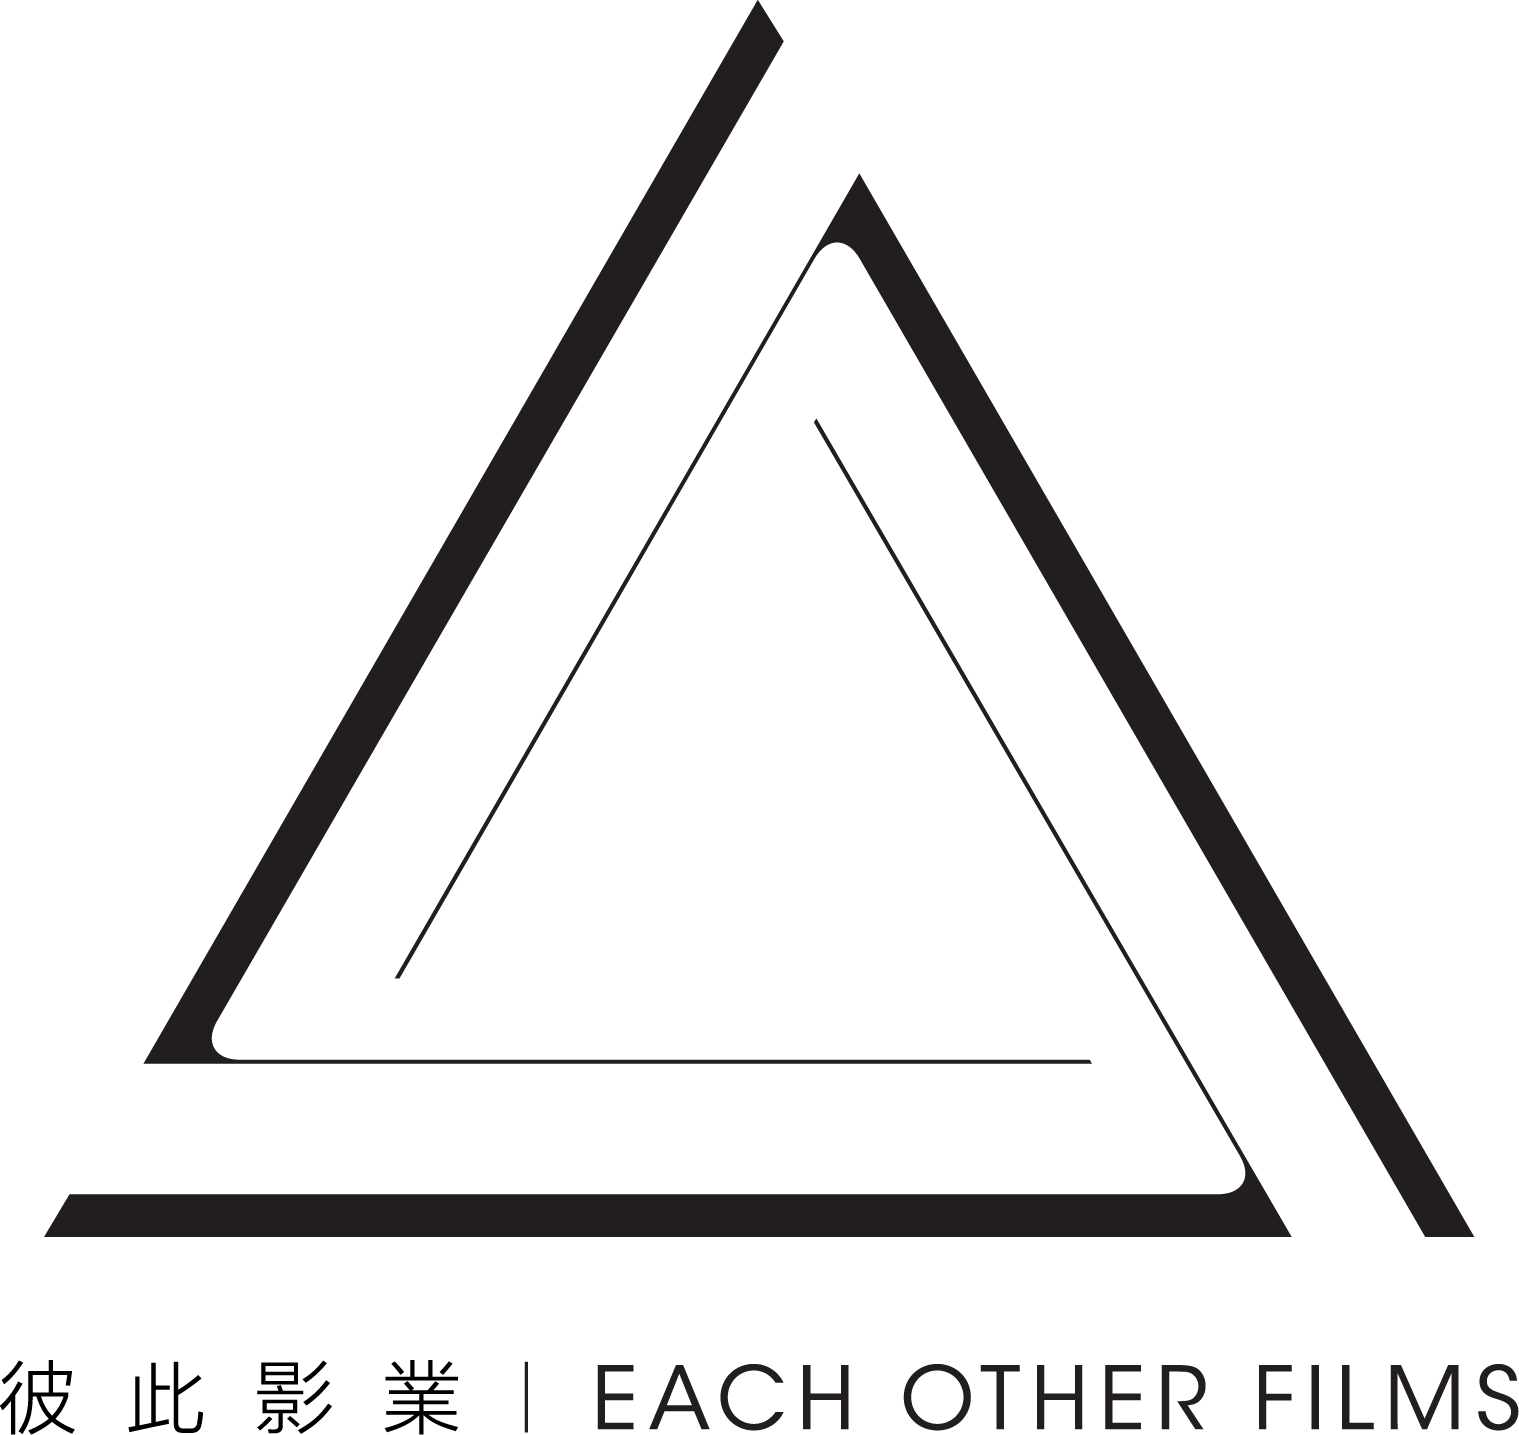 Each Other Films